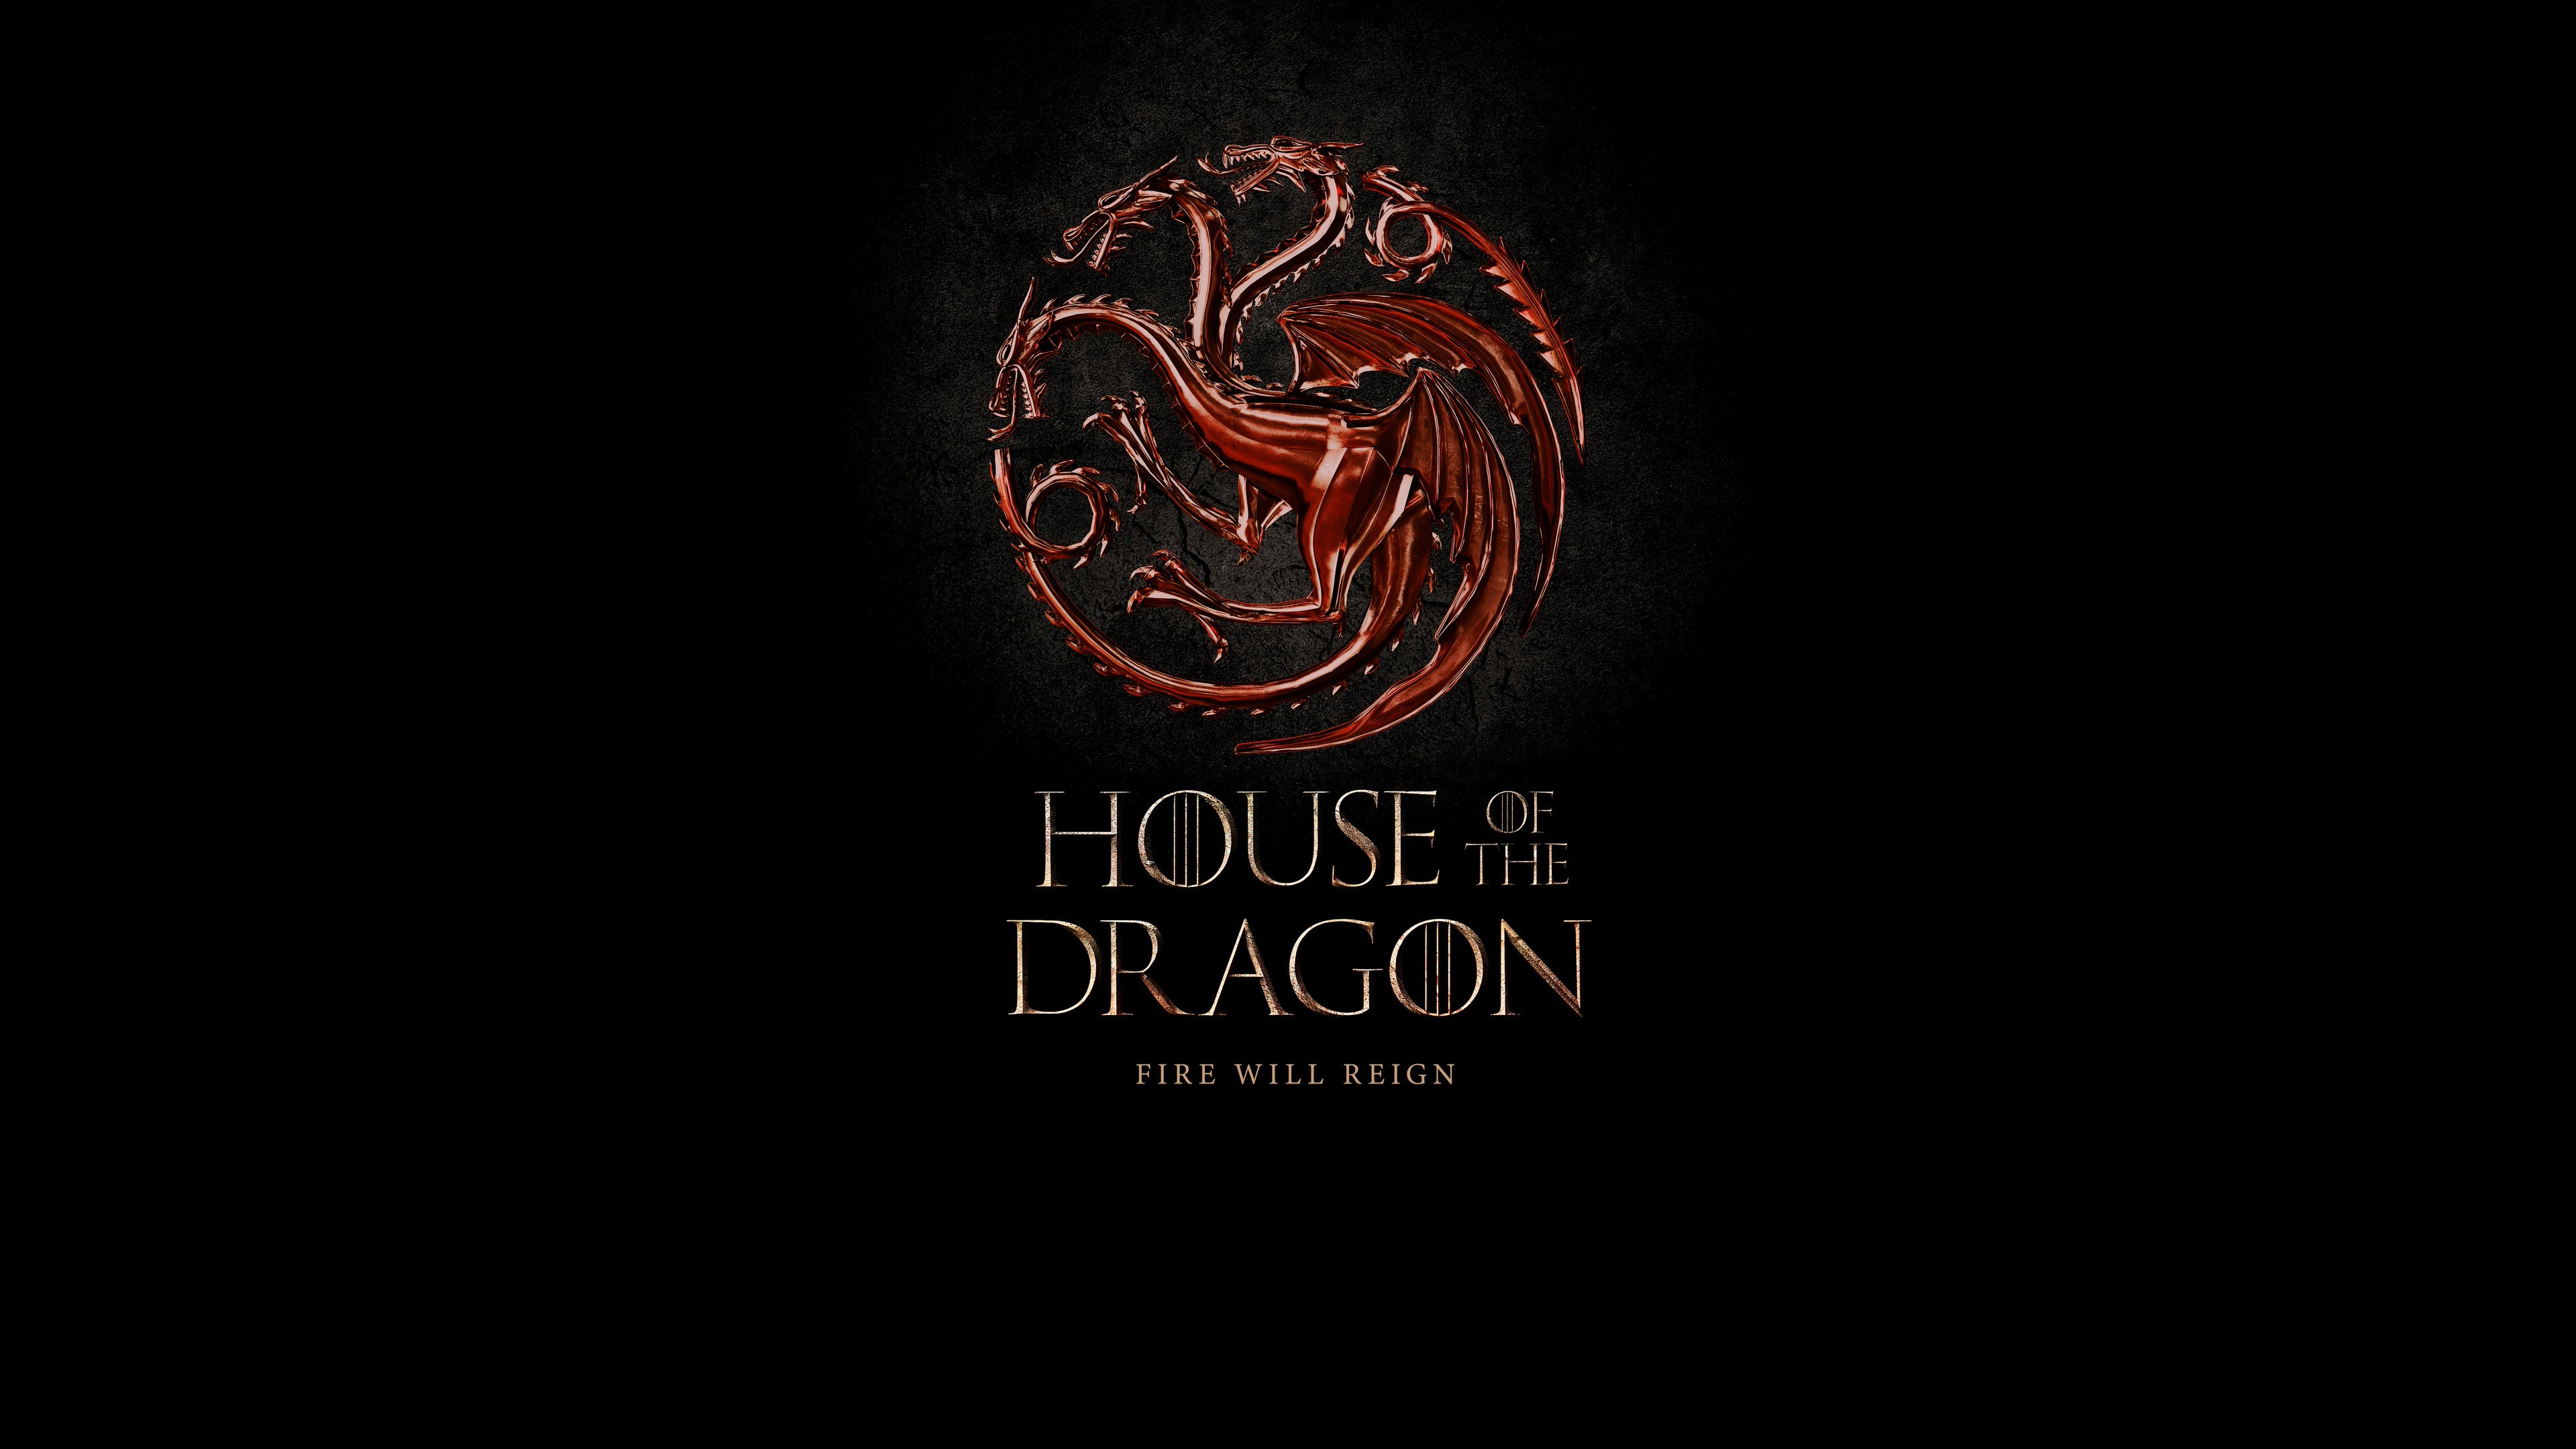 General 3840x2160 House of the Dragon dragon Game of Thrones logo black background TV series digital art simple background